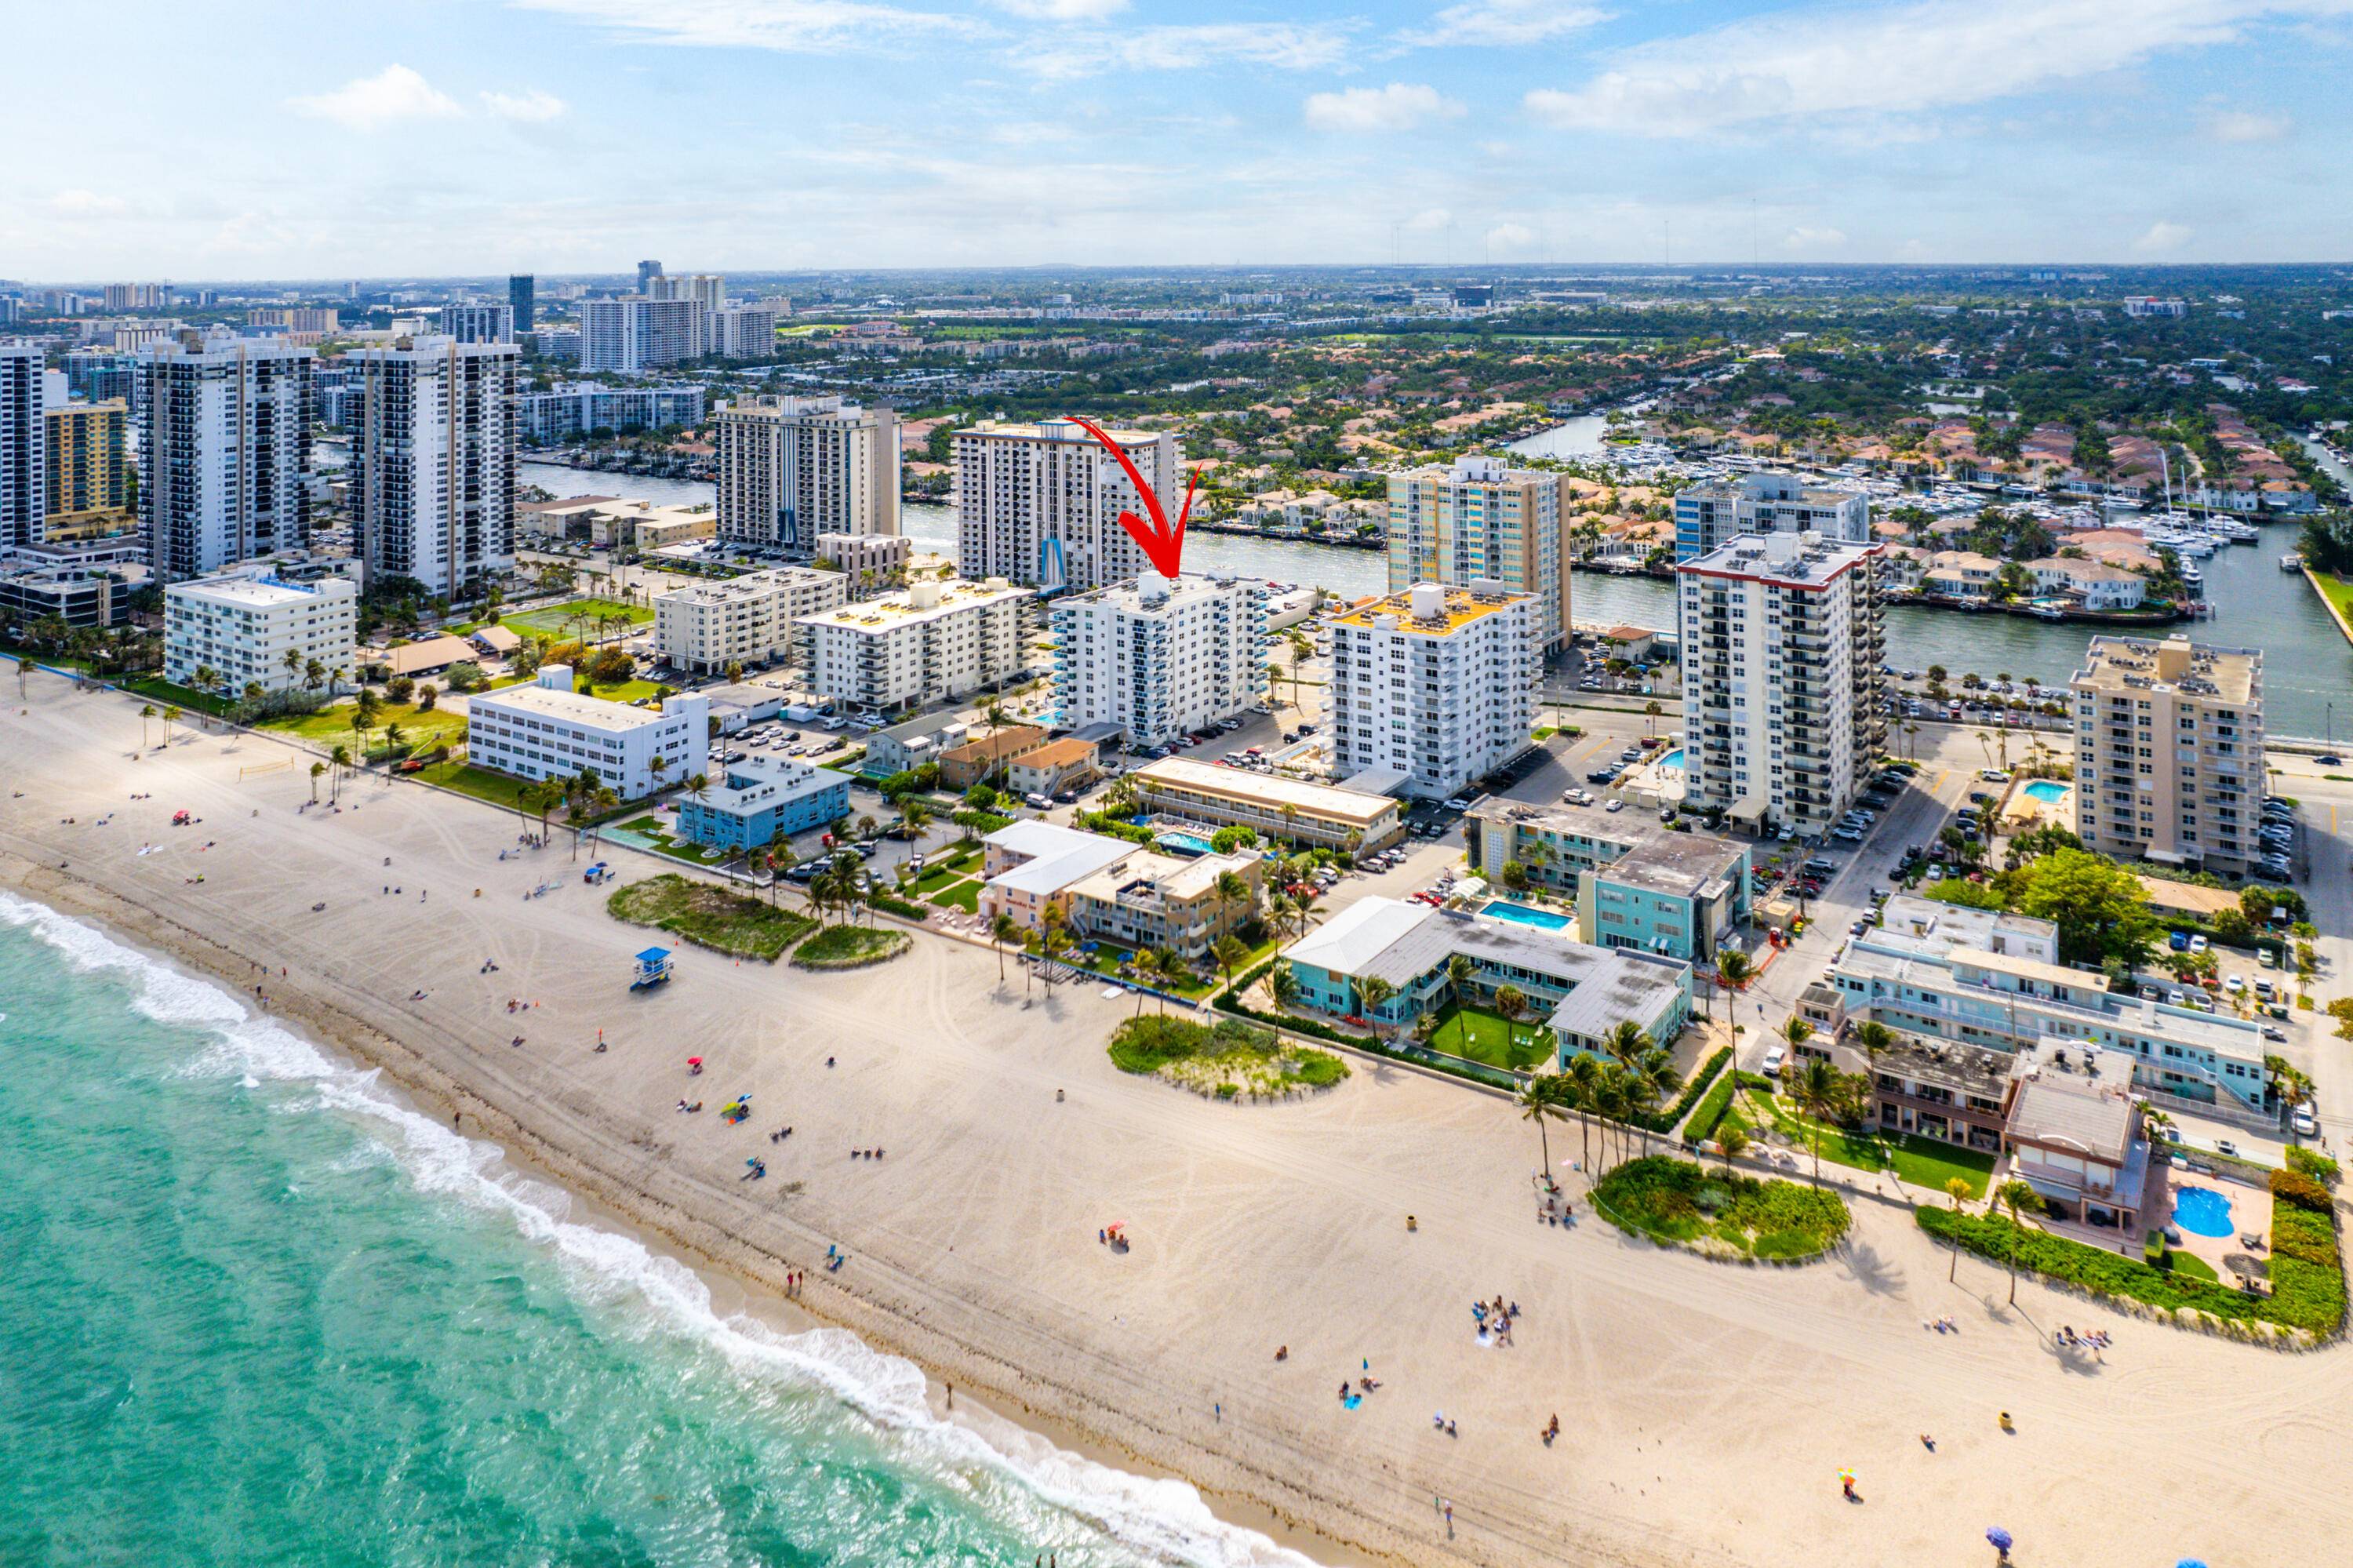 Discover the epitome of coastal luxury living in the heart of Hollywood, Florida where the sea breeze sunsets beckon you home.